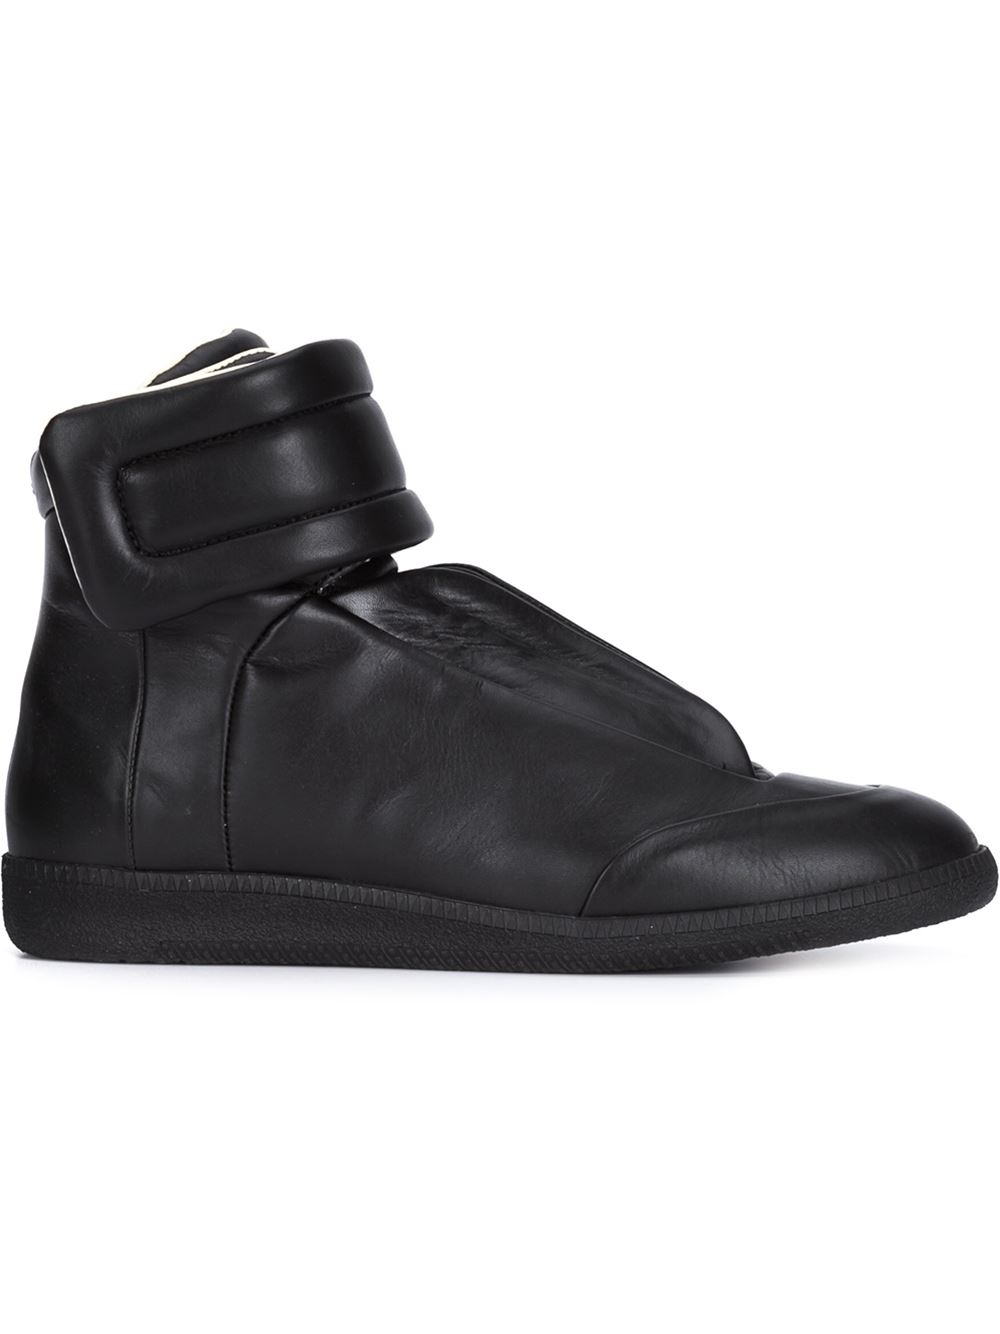 Maison Margiela Ankle Strap High-Top Sneakers in Black for Men | Lyst